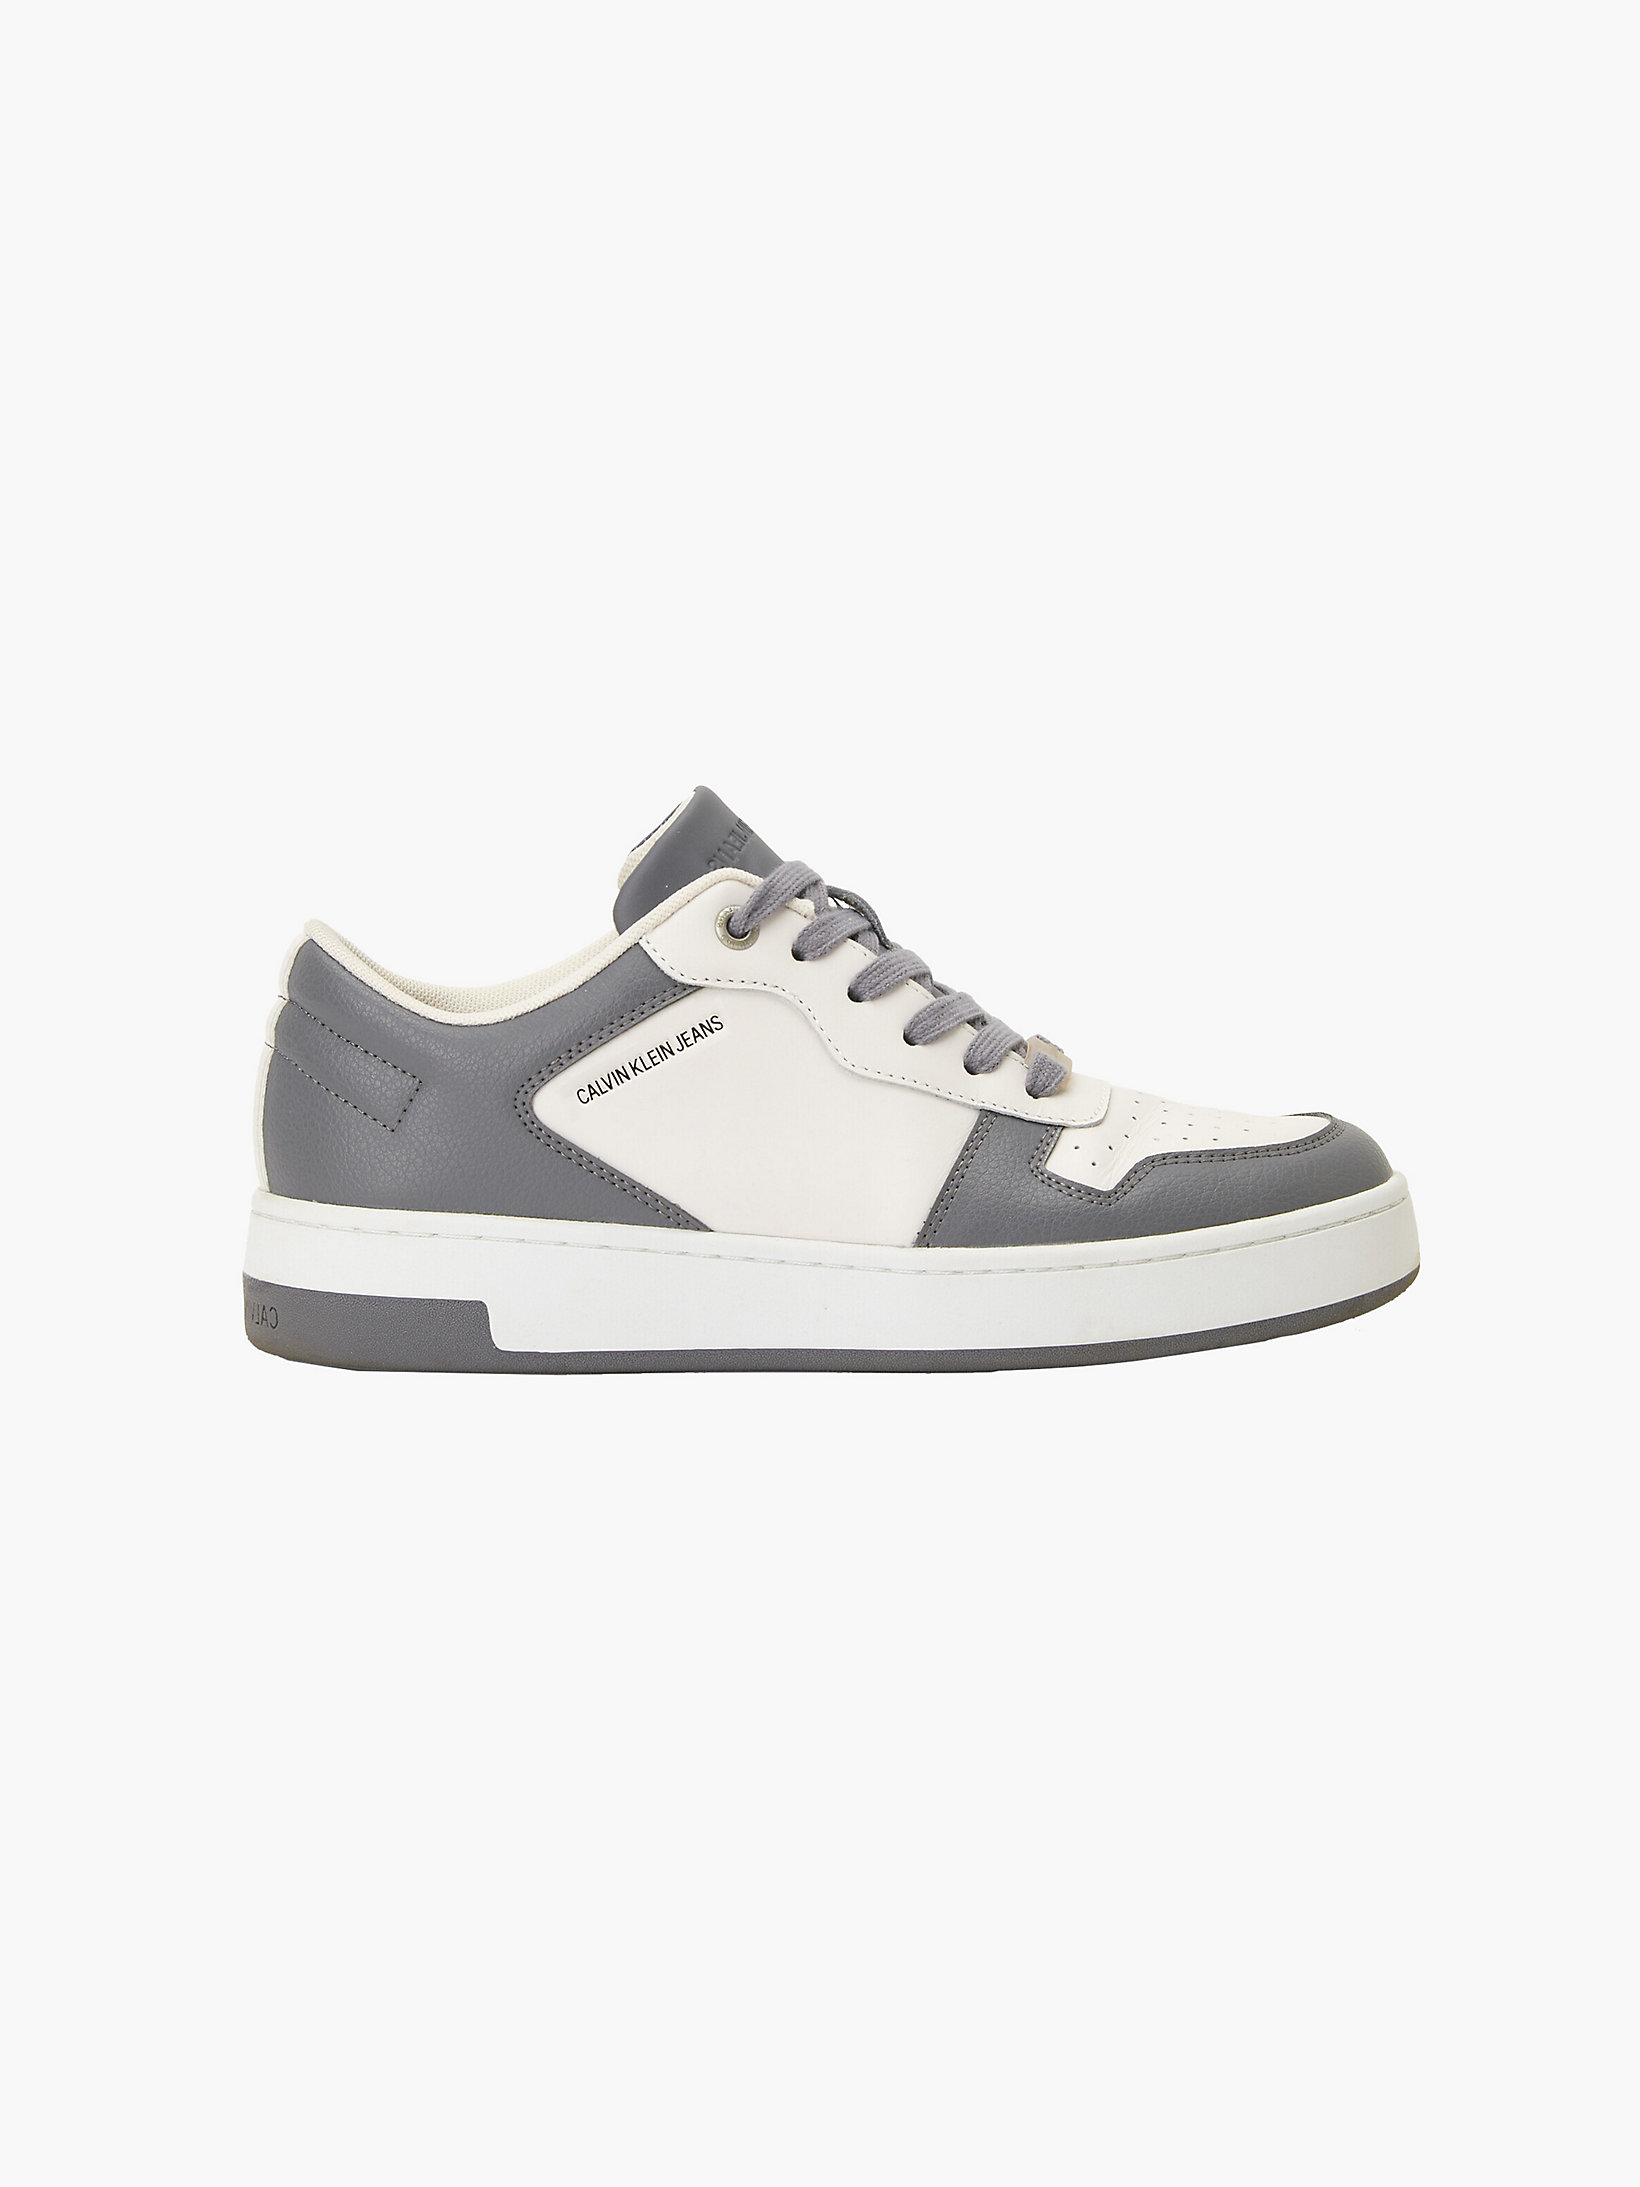 Natural Off White / Mid Grey Trainers undefined women Calvin Klein